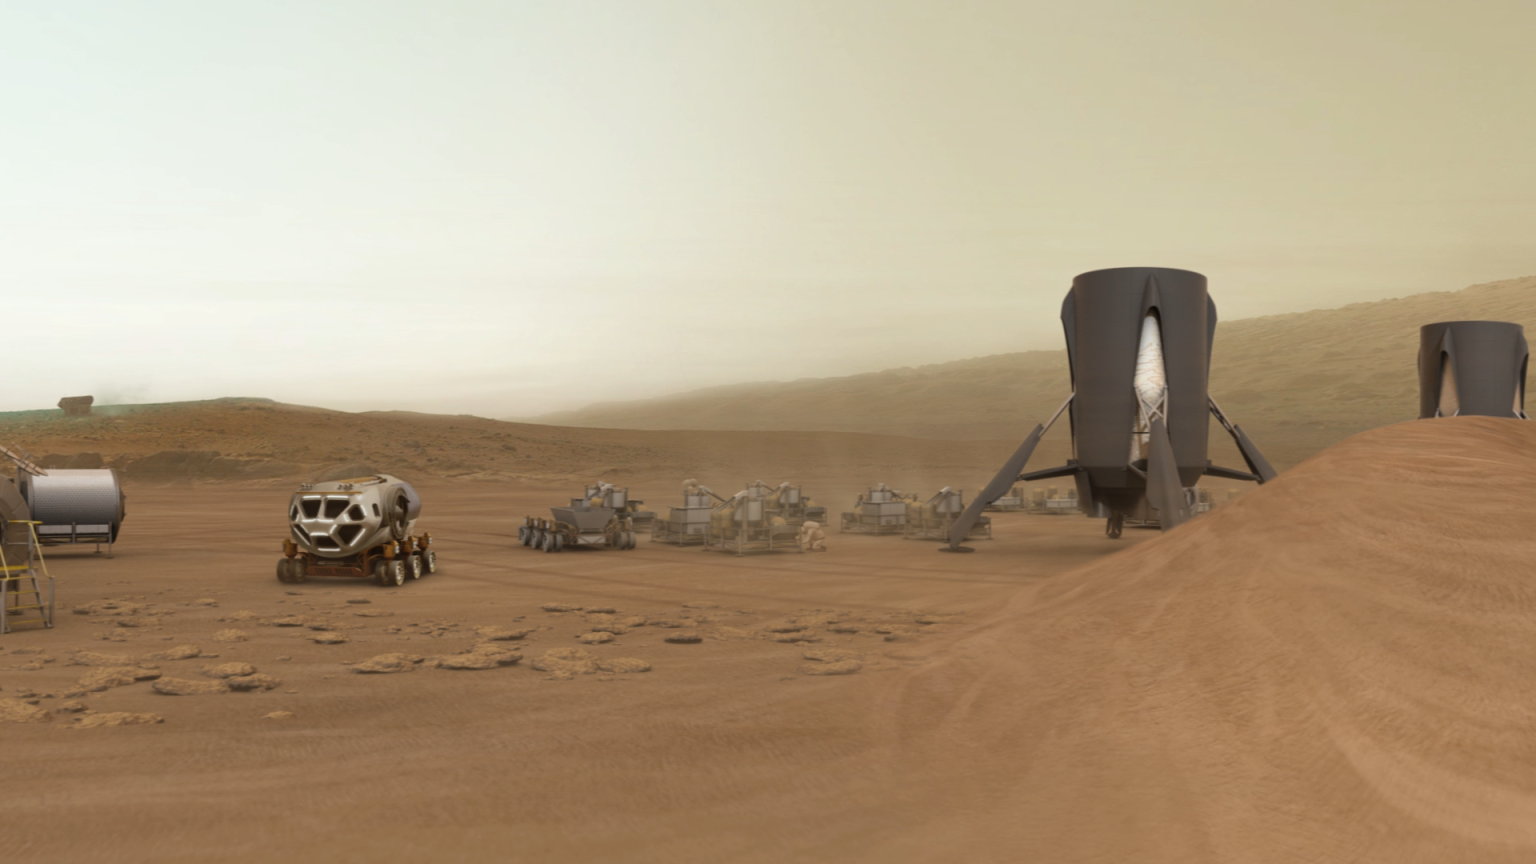 A vehicle is parked next to a Martian base. Cargo can be seen next to the base and vehicle.